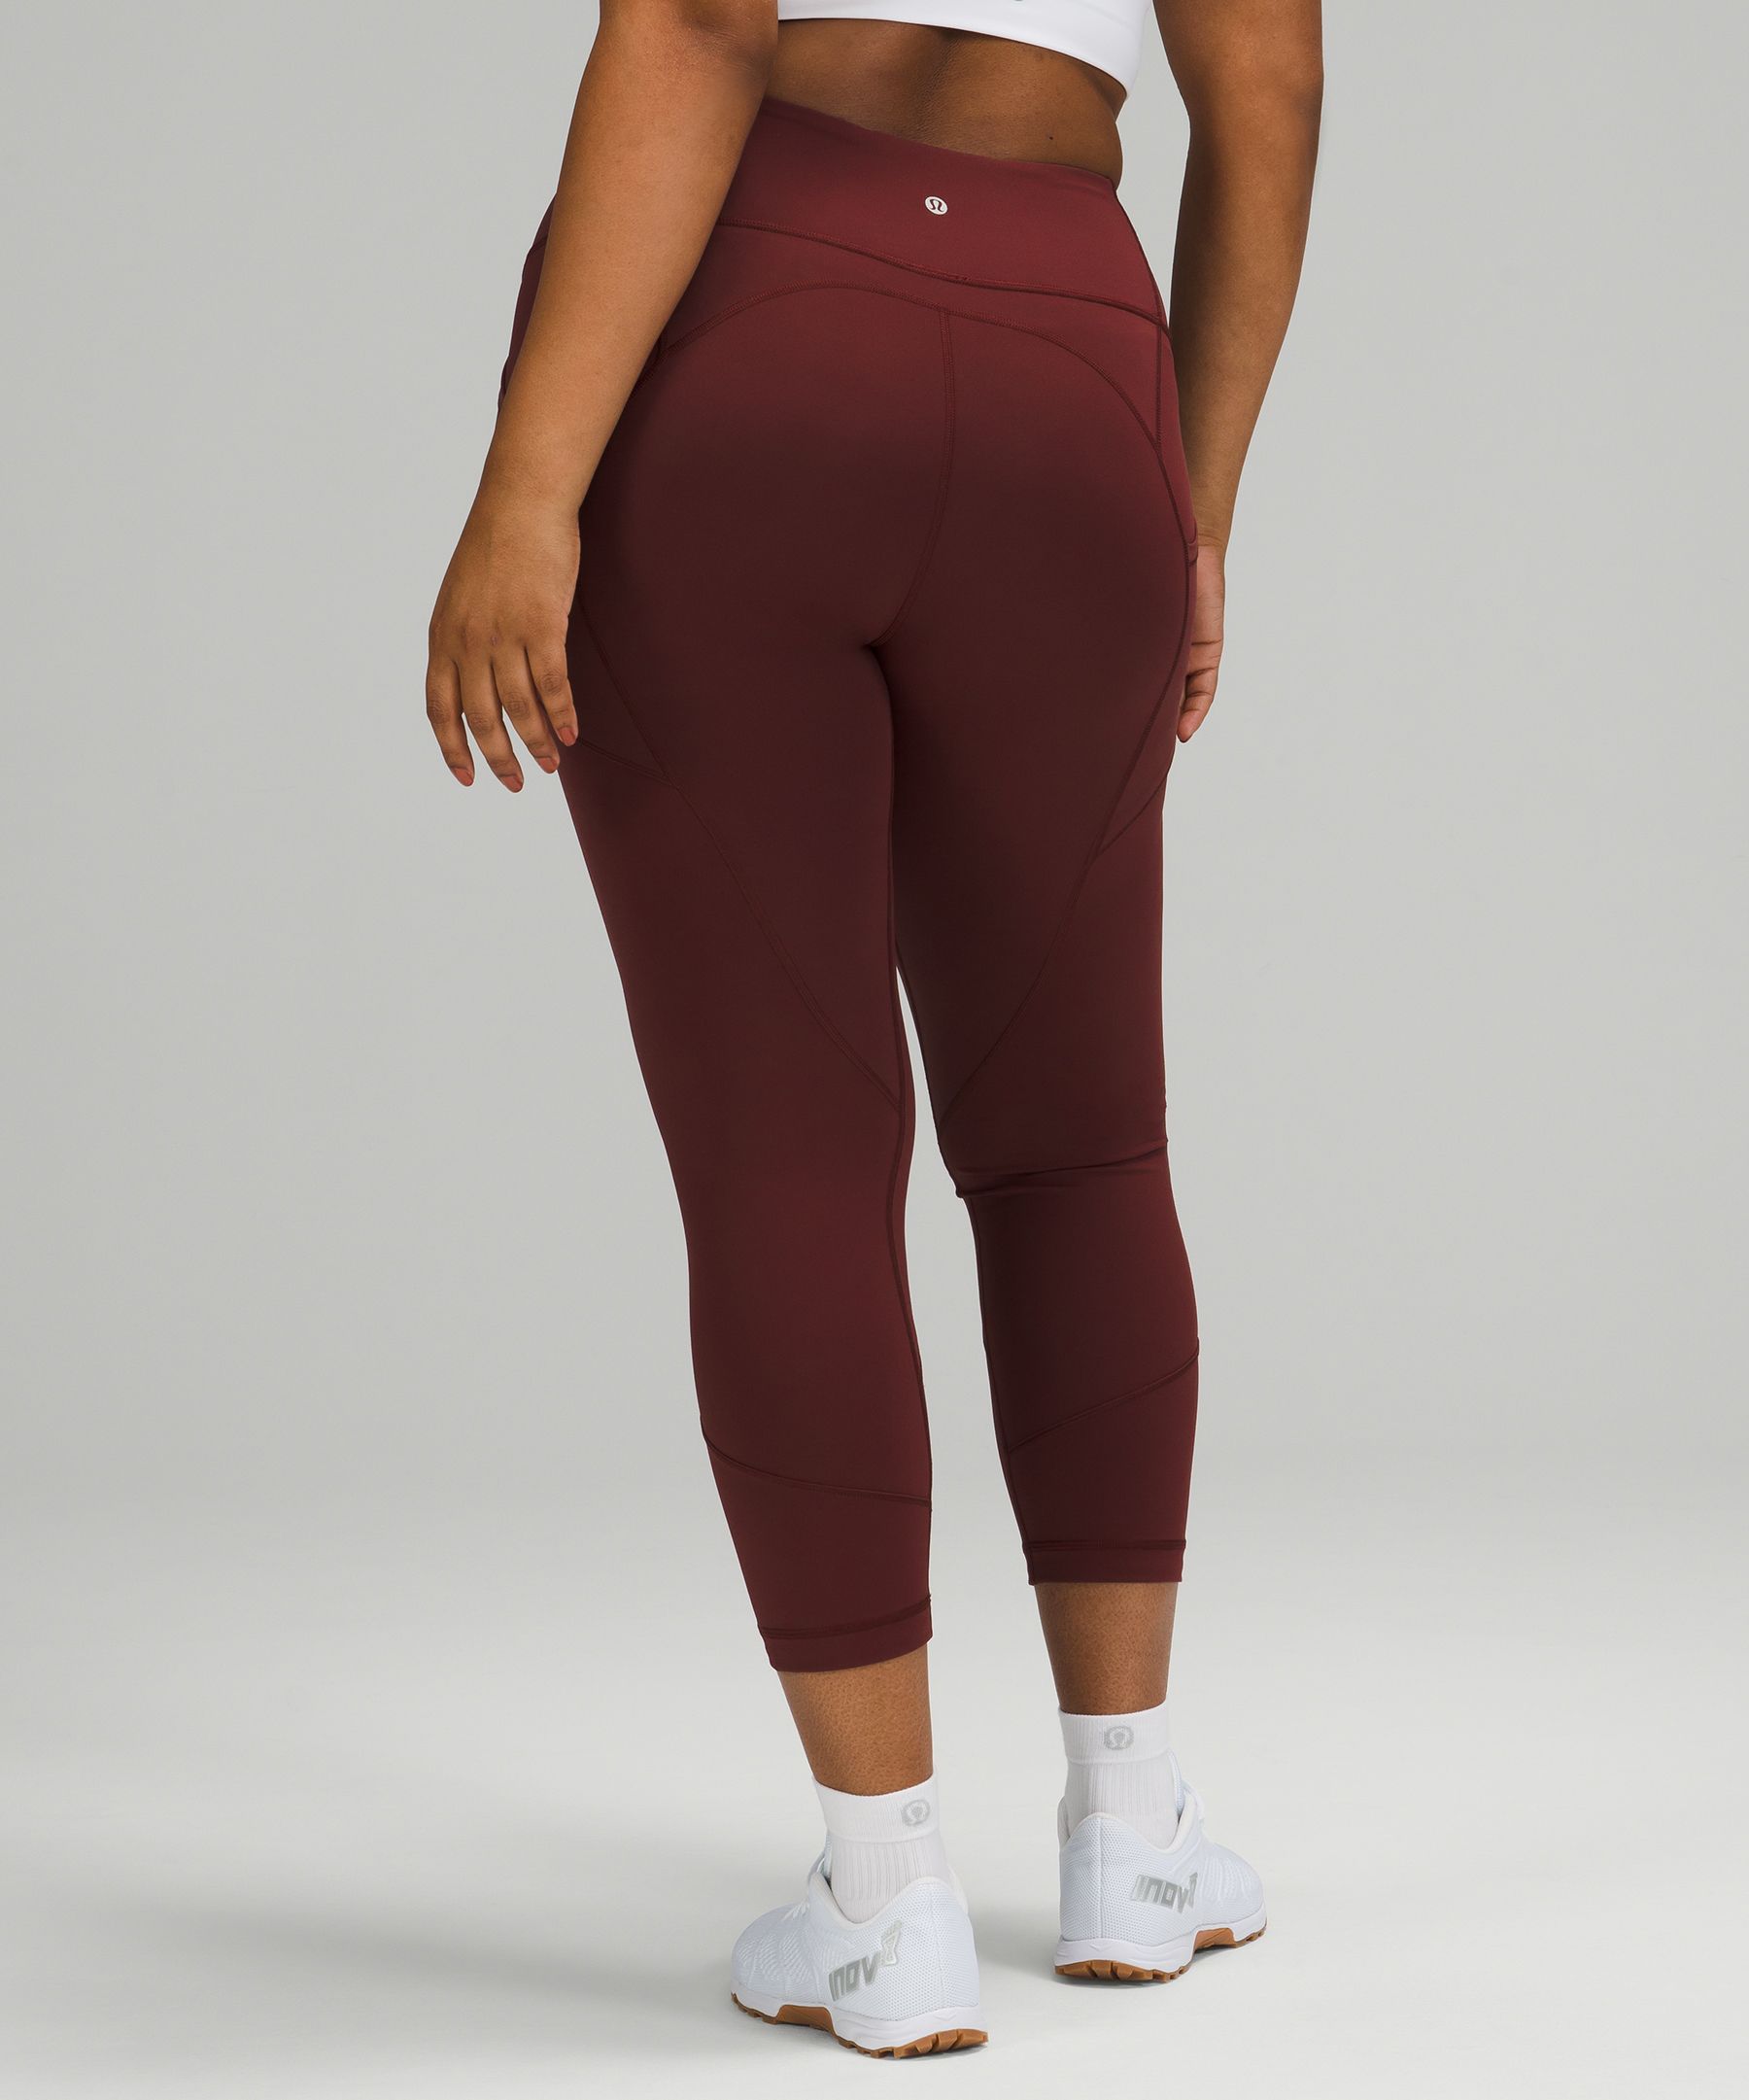 All The Right Places Crop 23 Lululemon Leggings